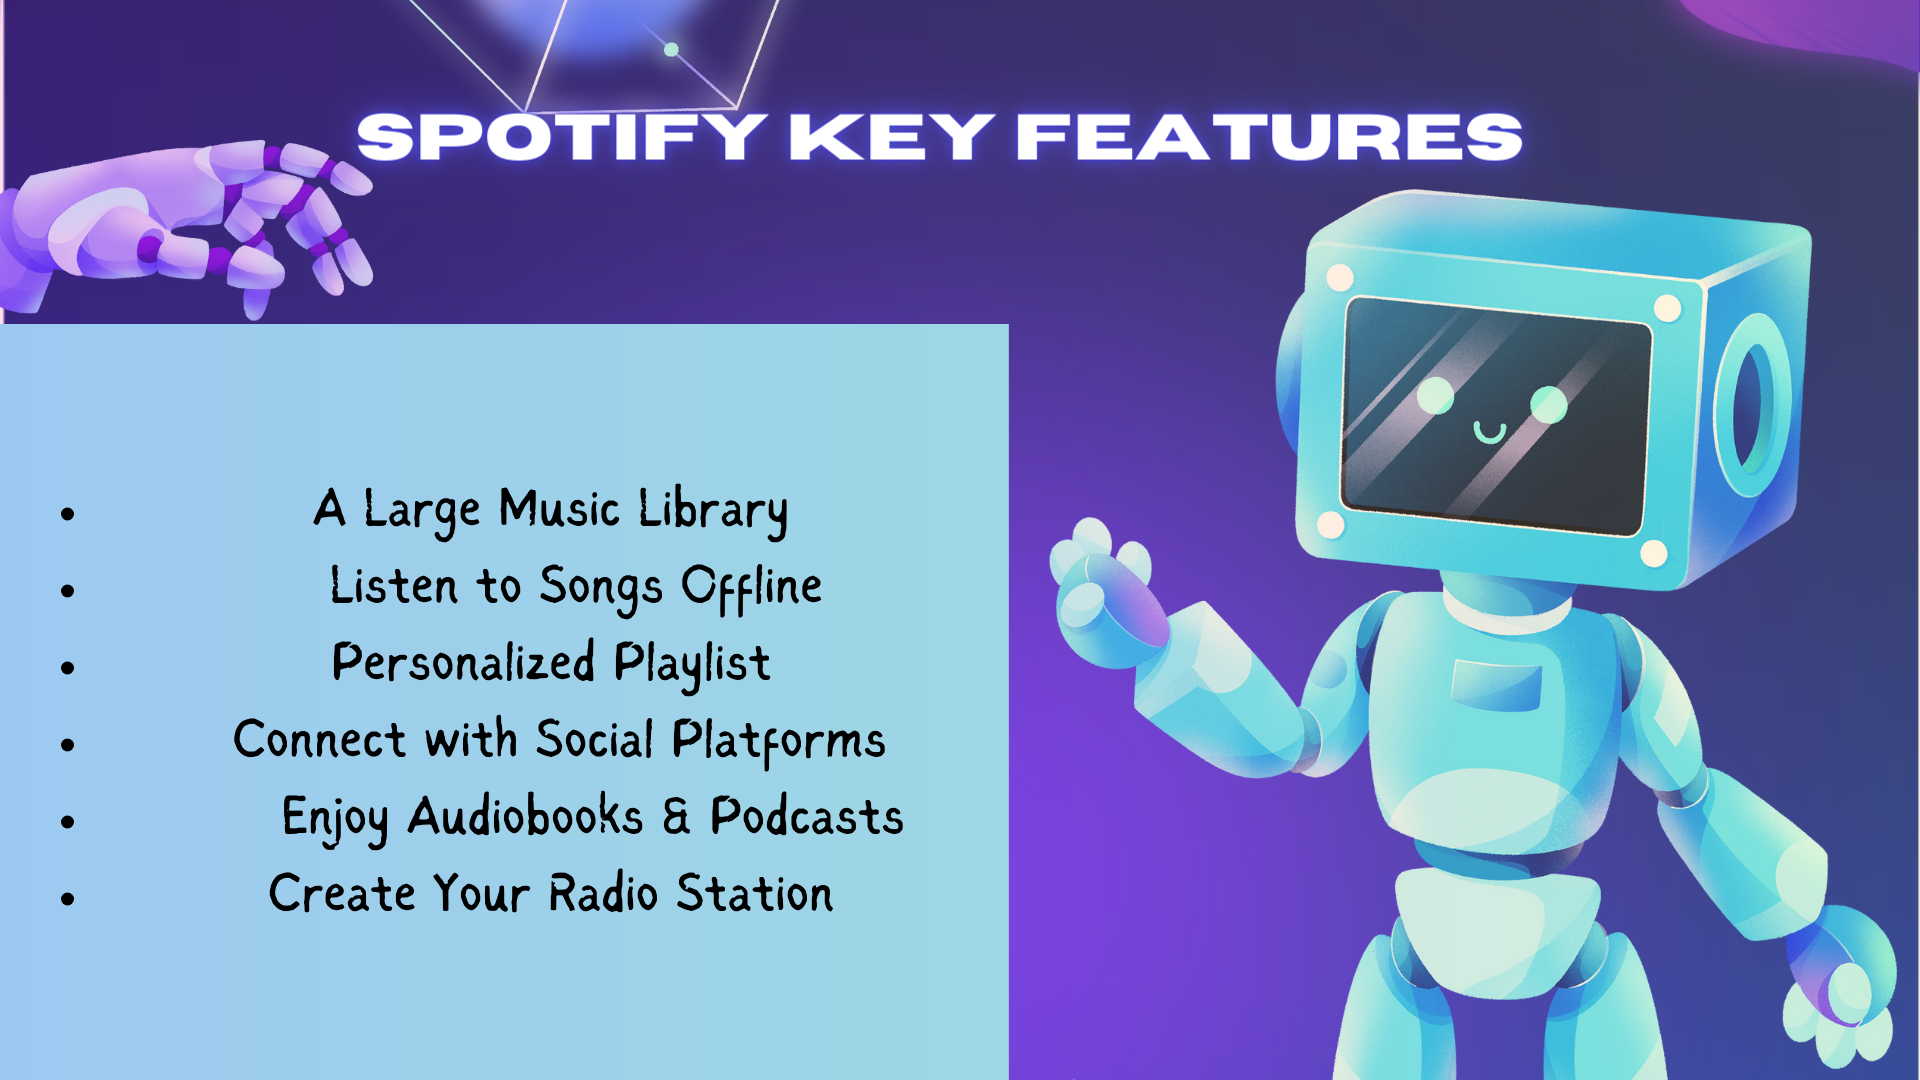 Download Spotify Mod Apk 8.9.24.633 Old Version here and find spotify mod apk premium Key Features
